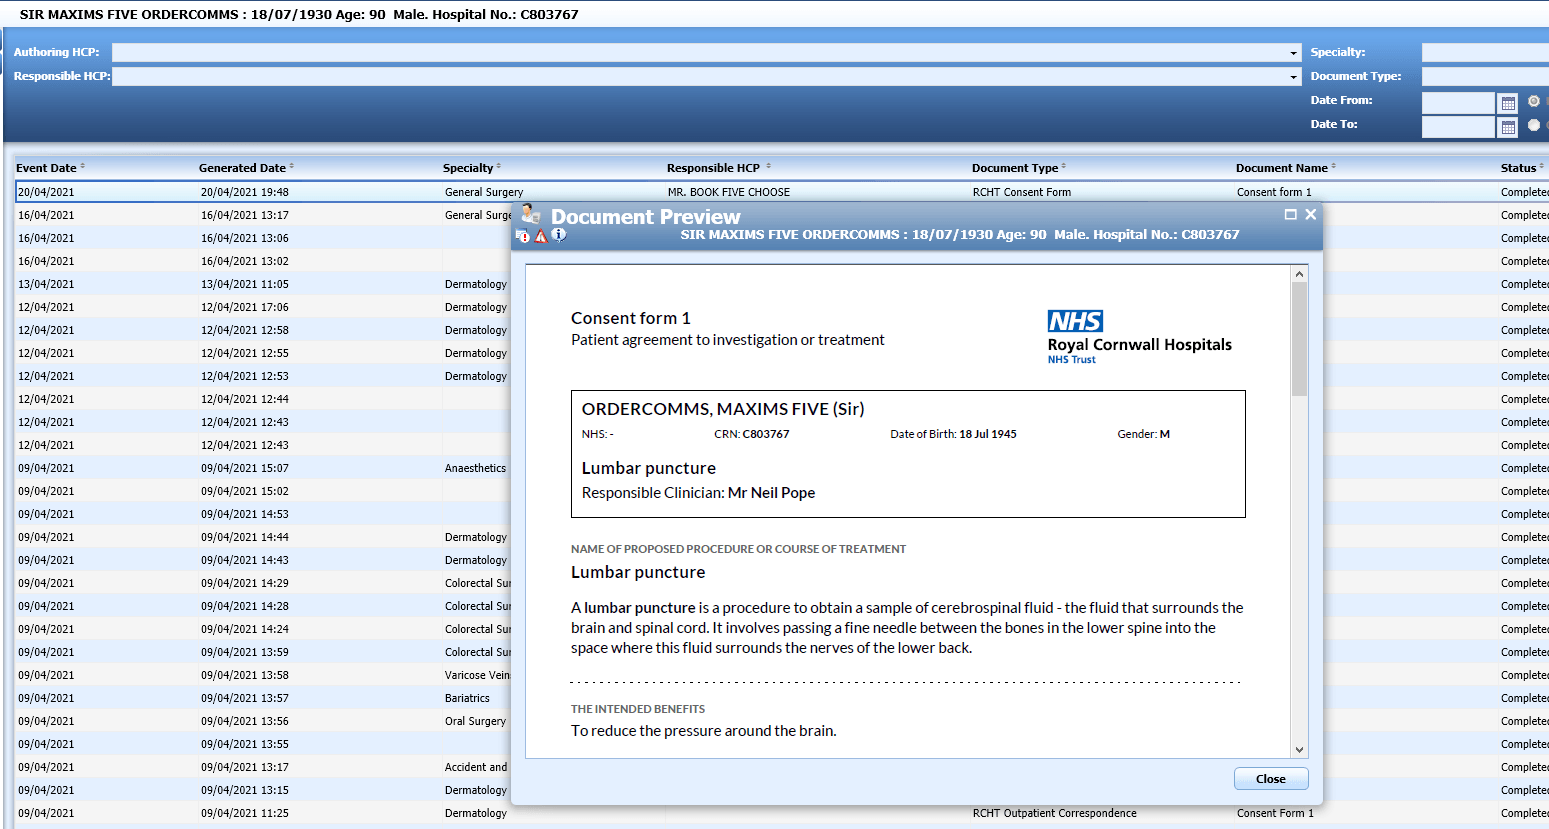 Consent form visible in Maxims